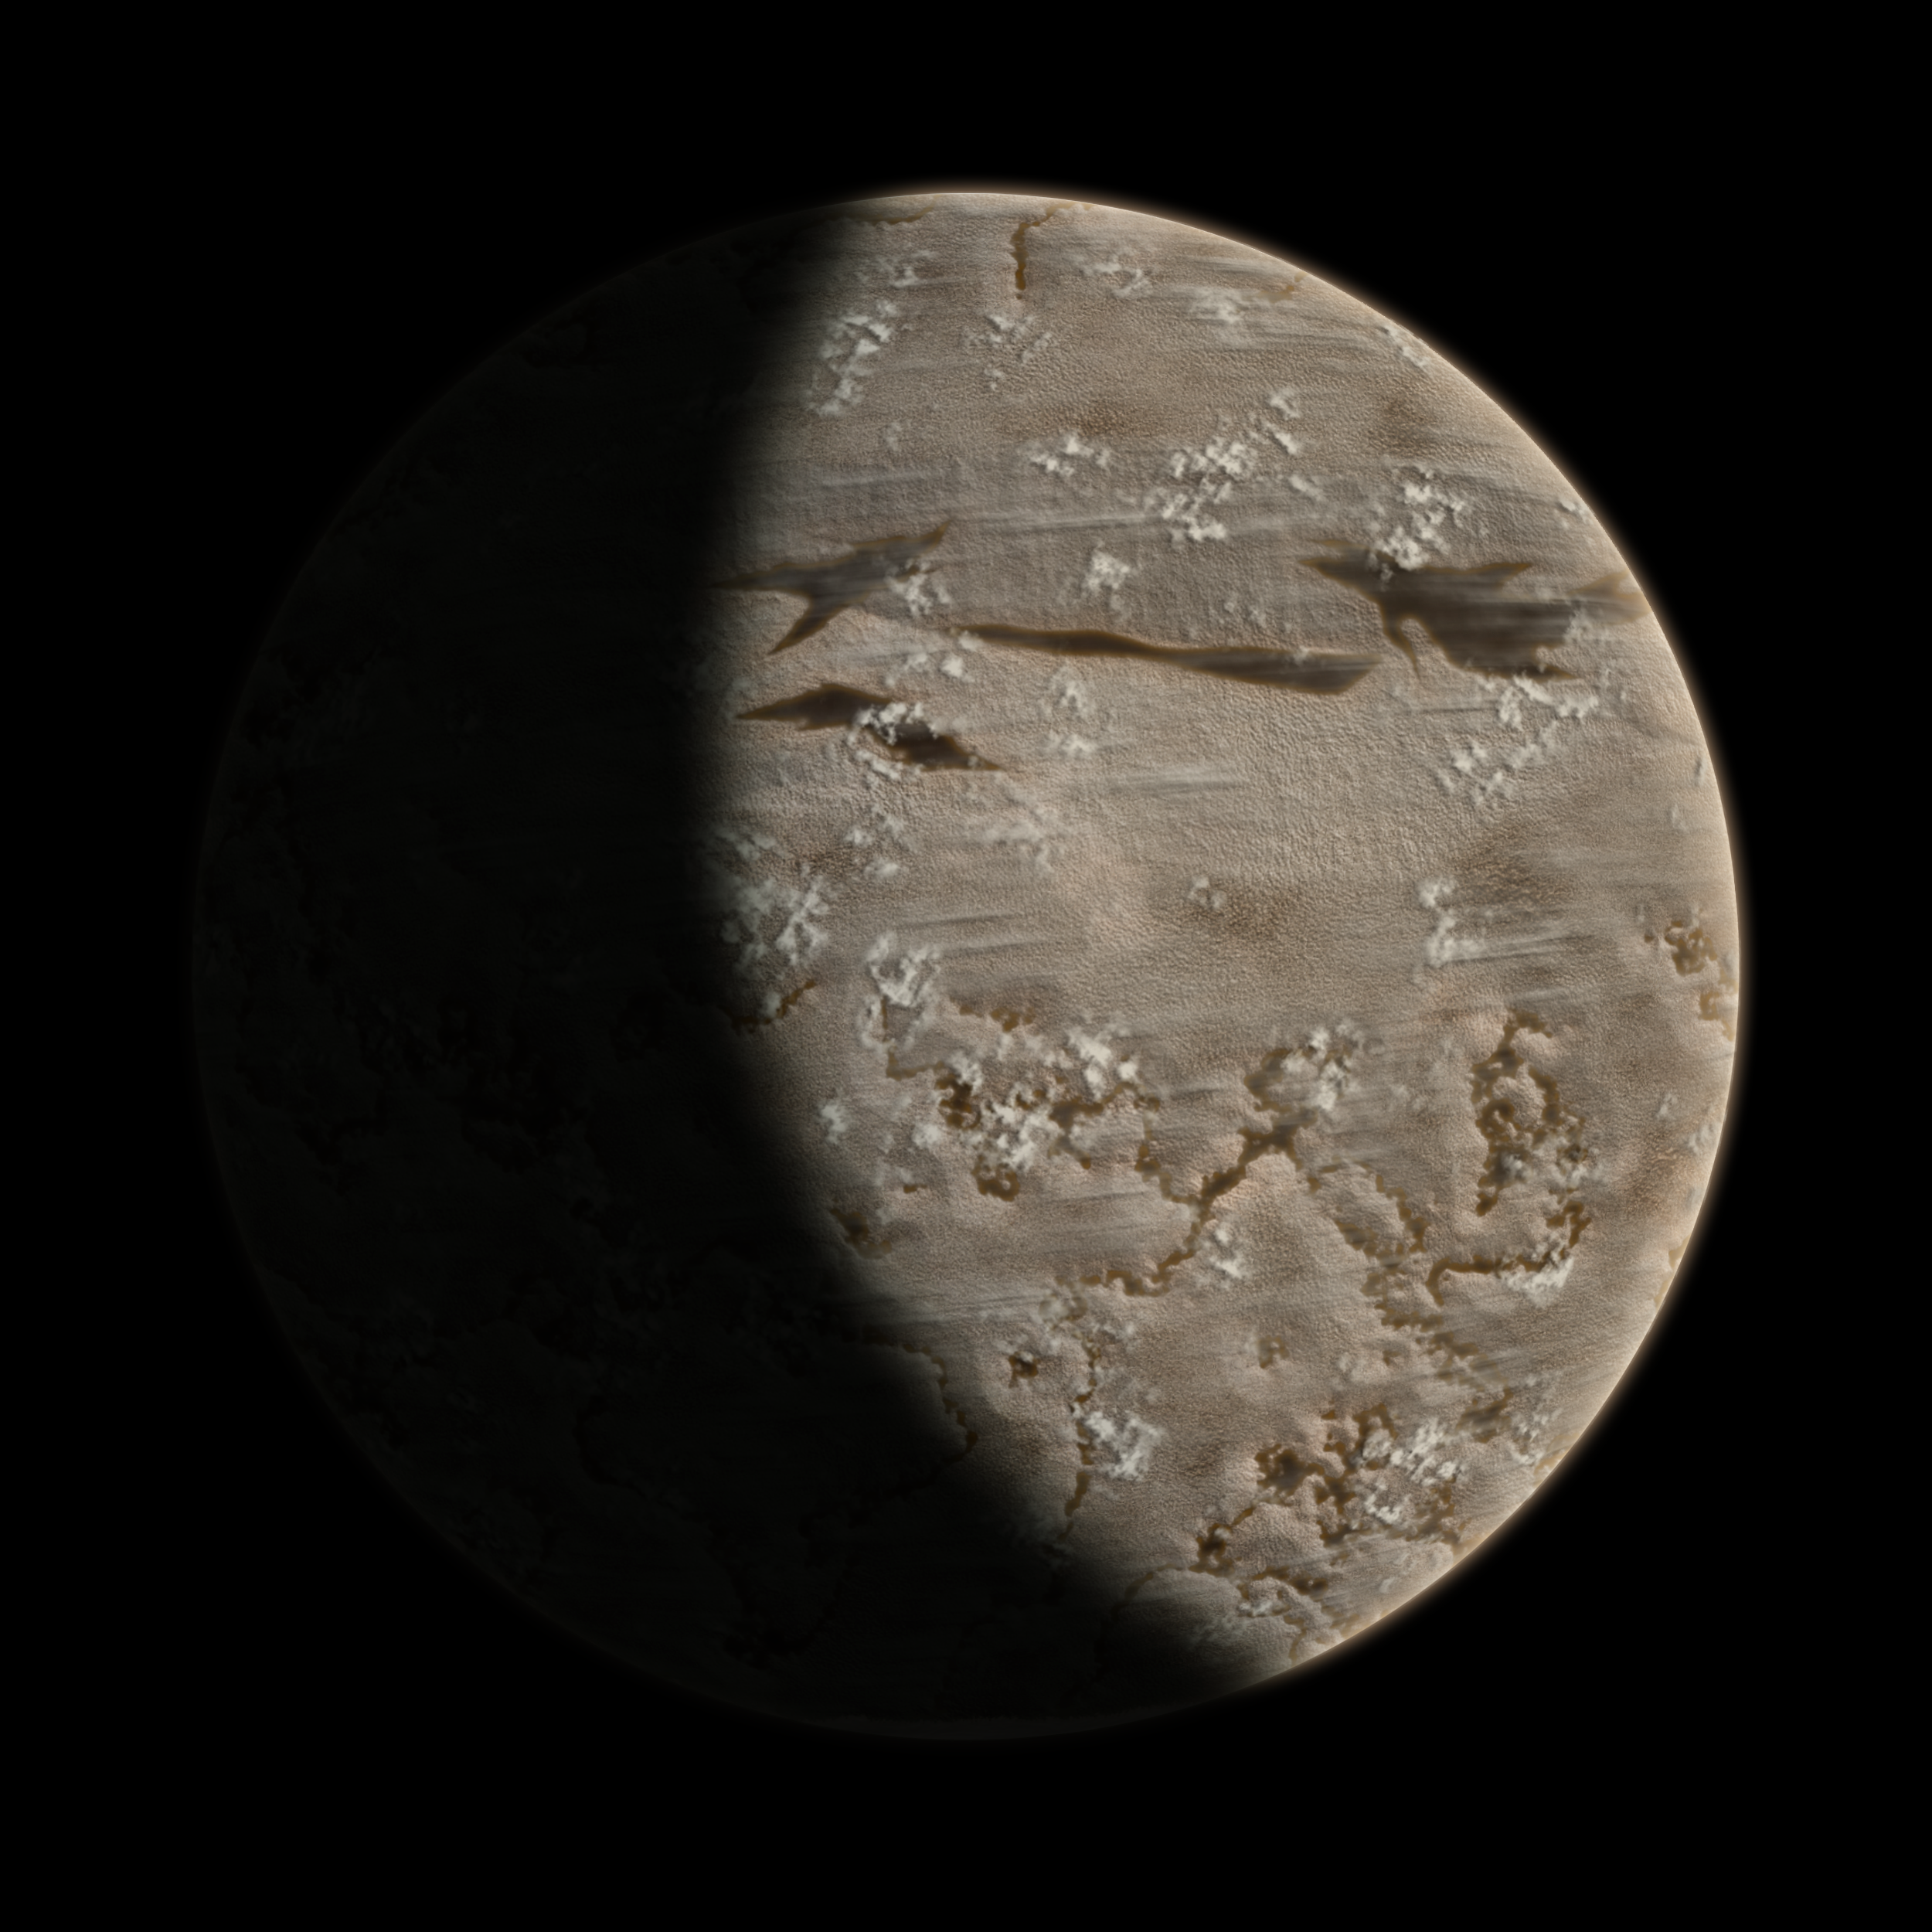 planet_destry_by_samio85-d7aq7d3.png